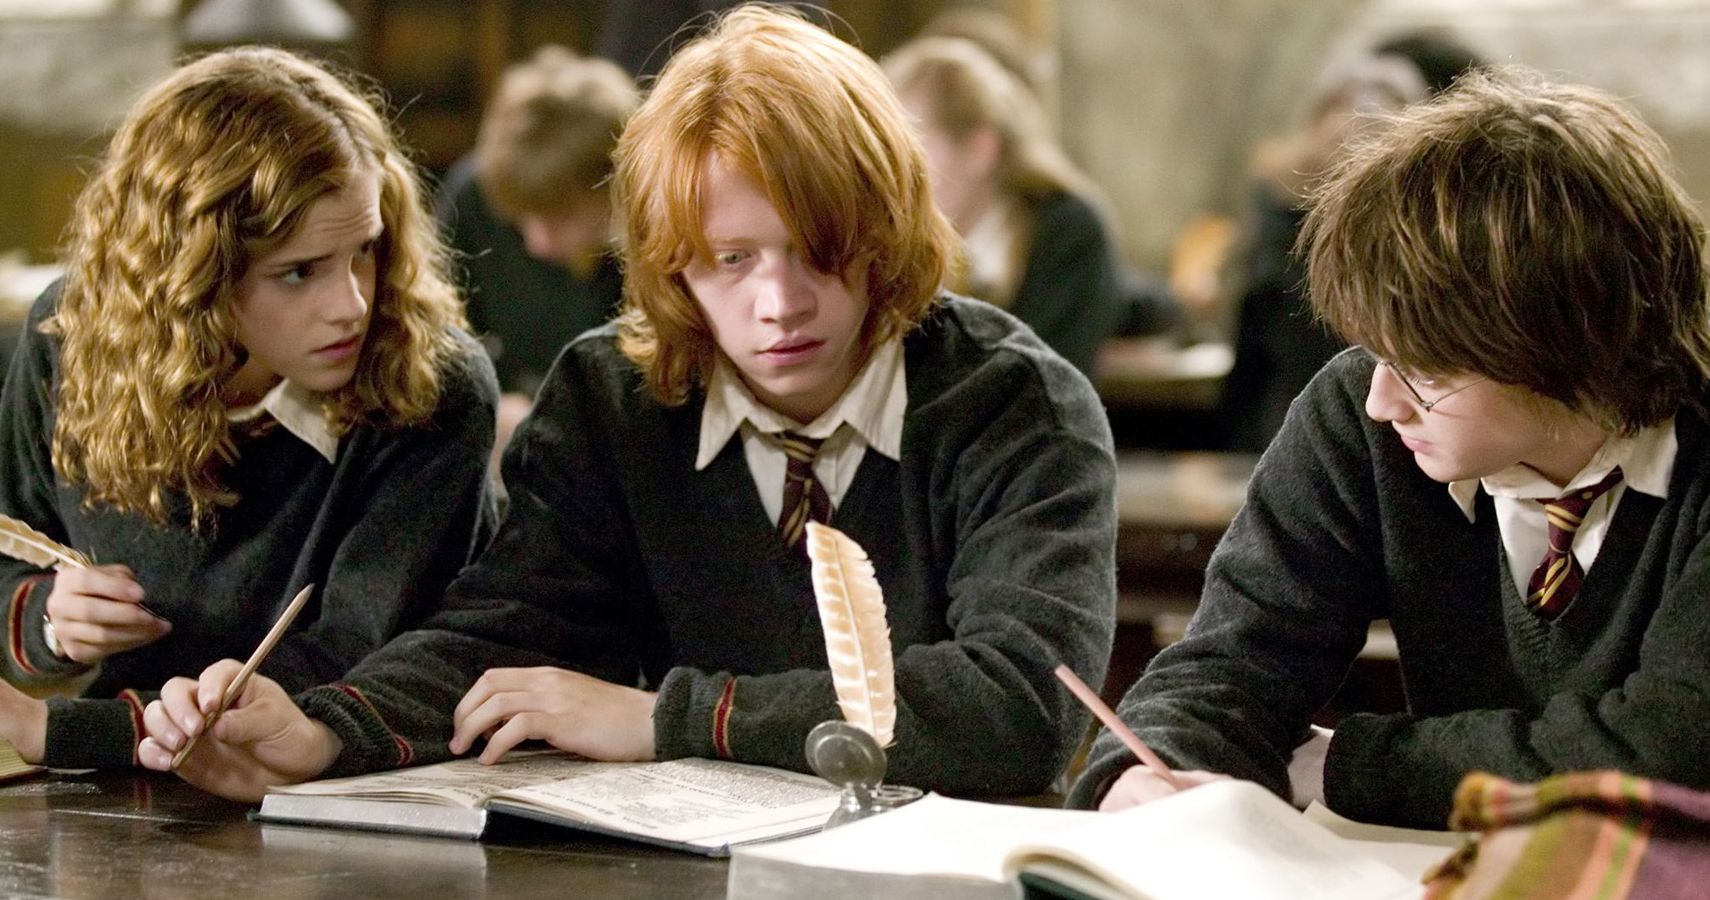 Hermione Granger, Ron Weasley, and Harry Potter studying in the Great Hall of Hogwarts